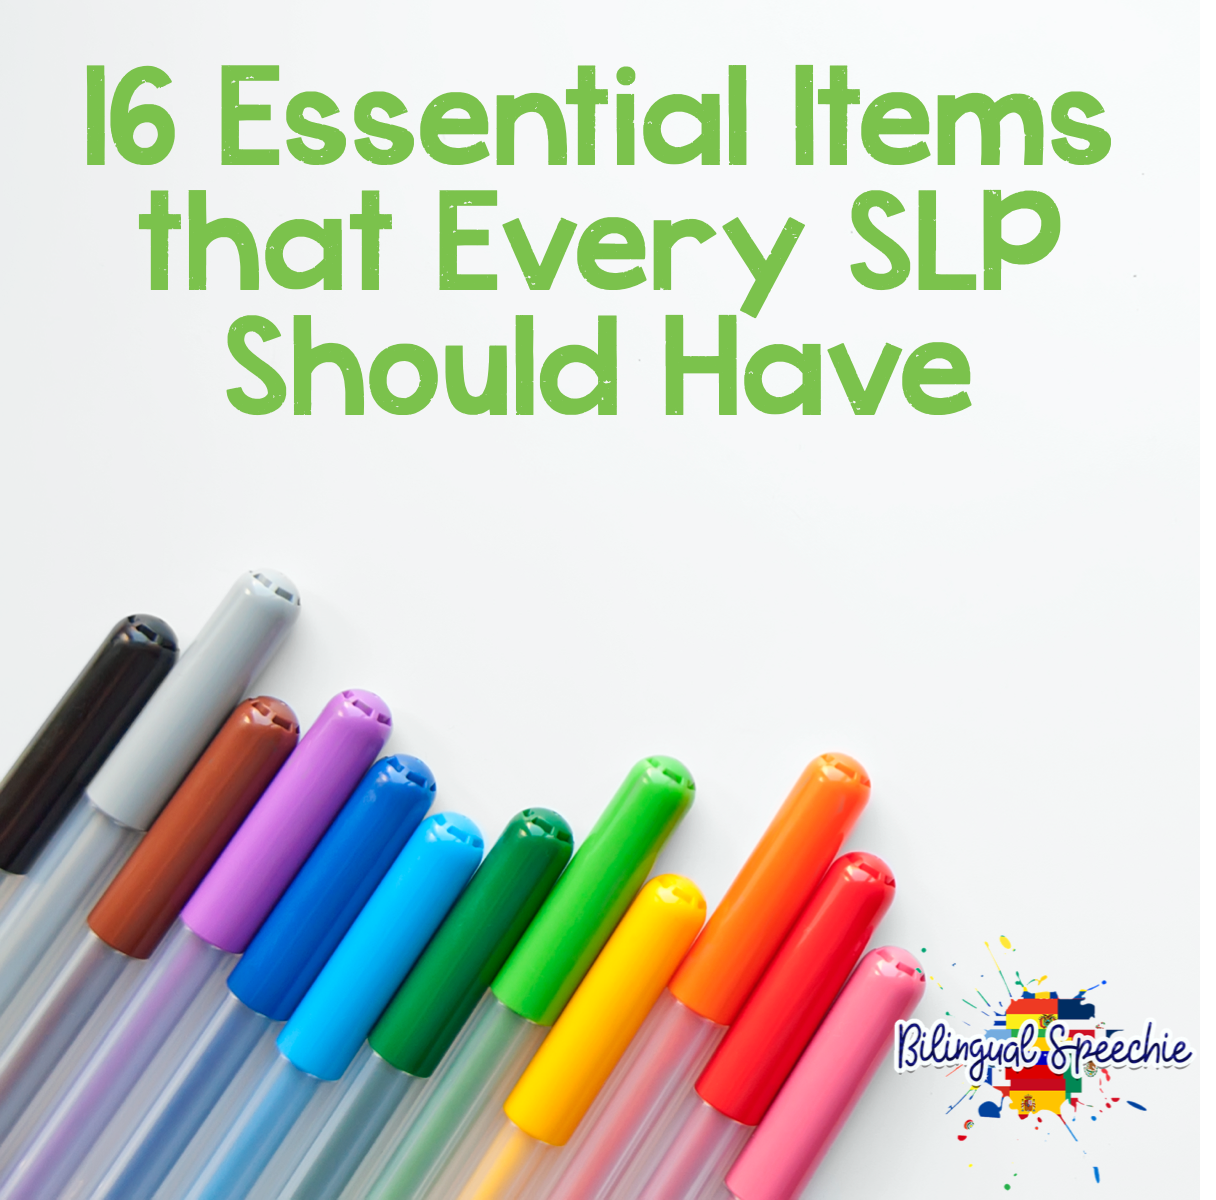 16 Essential Items that Every SLP Should Have